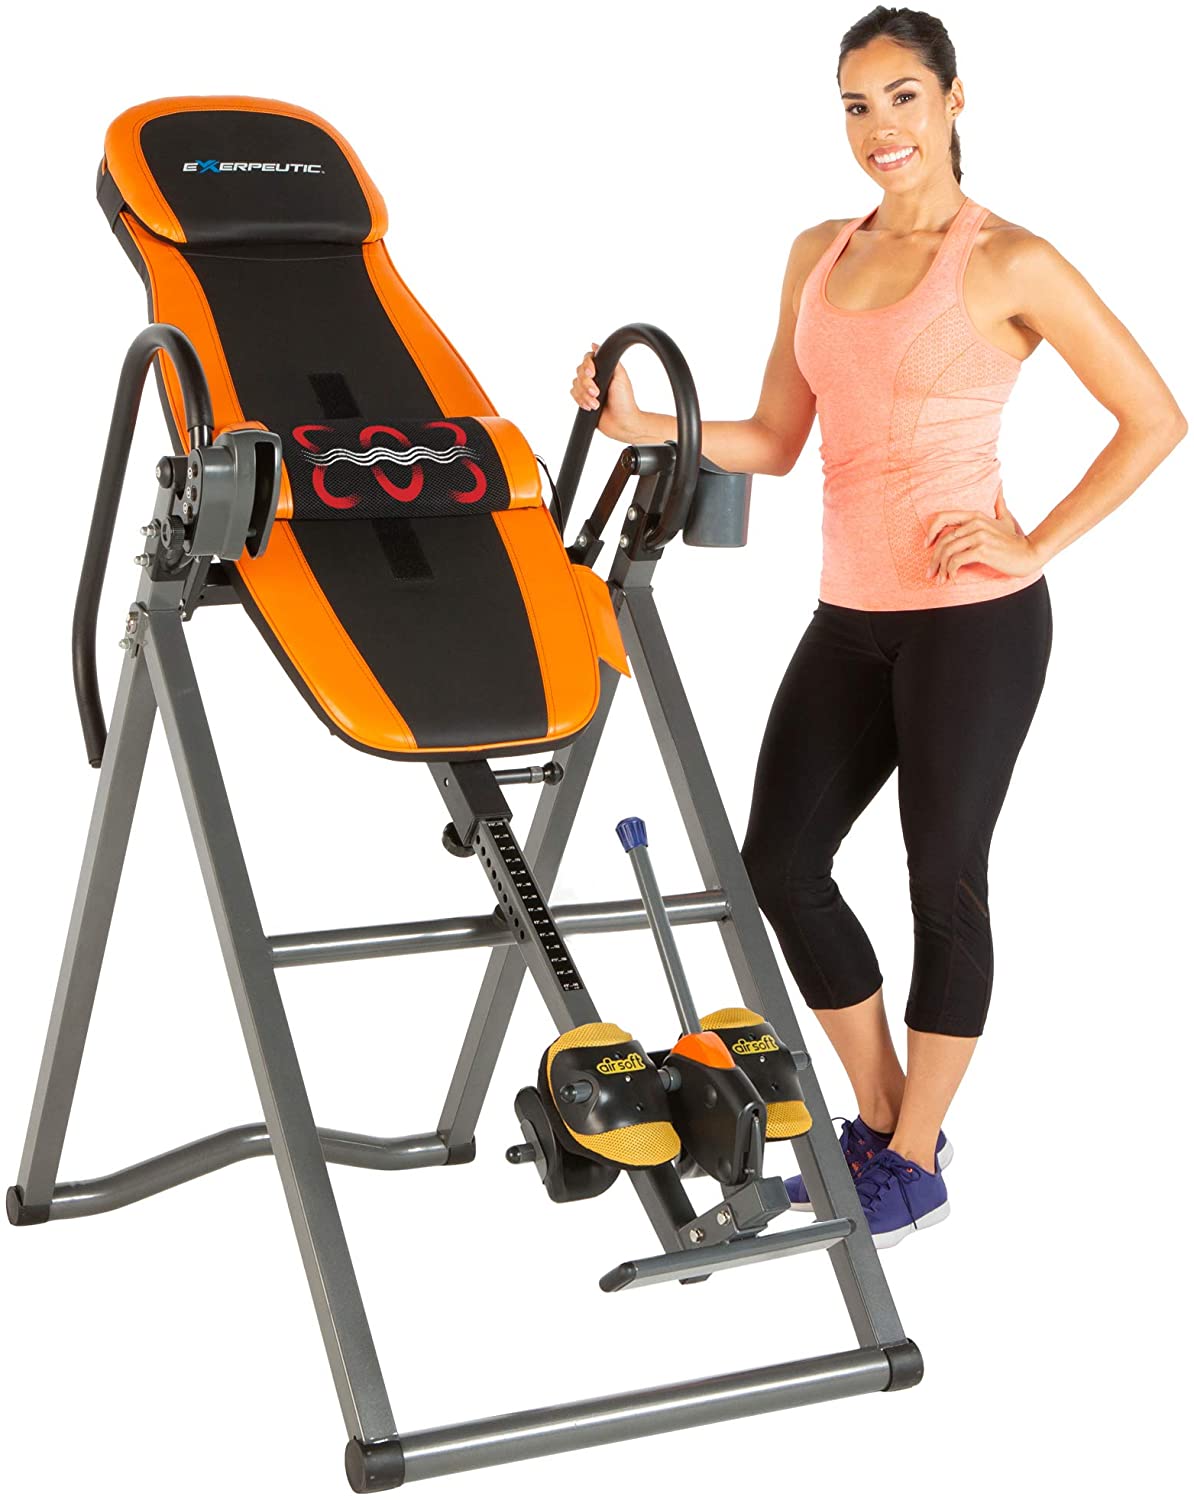 Exerpeutic Vibrating Adjustable Inversion Table